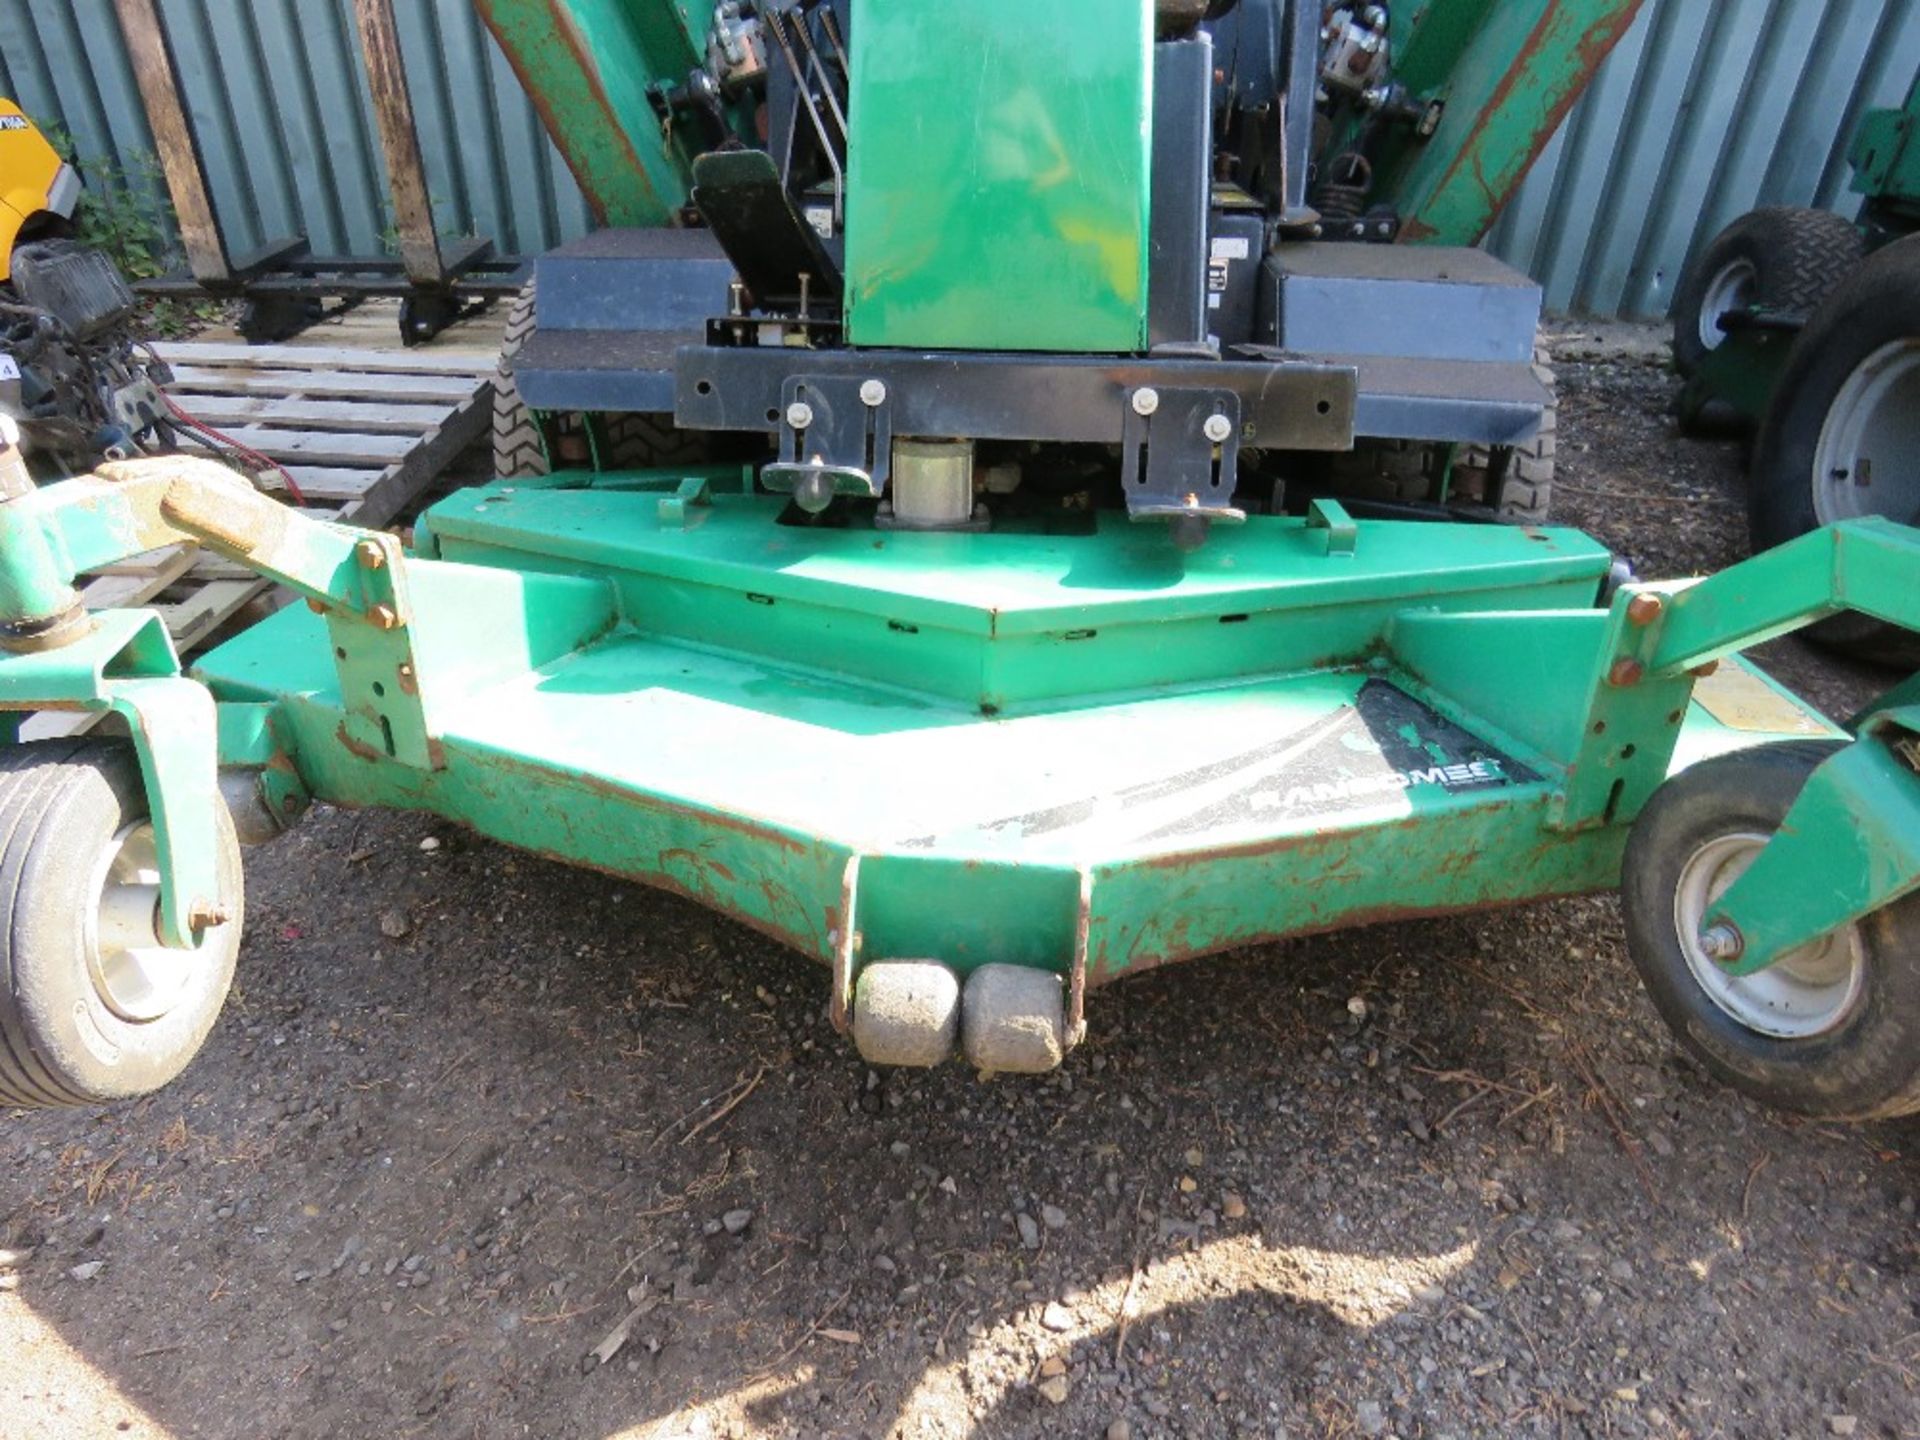 RANSOMES HR6010RAN BATWING MOWER REG:DX09 LTZ (LOG BOOK TO APPLY FOR) 3403 REC HRS. WHEN TESTED WA - Image 12 of 12